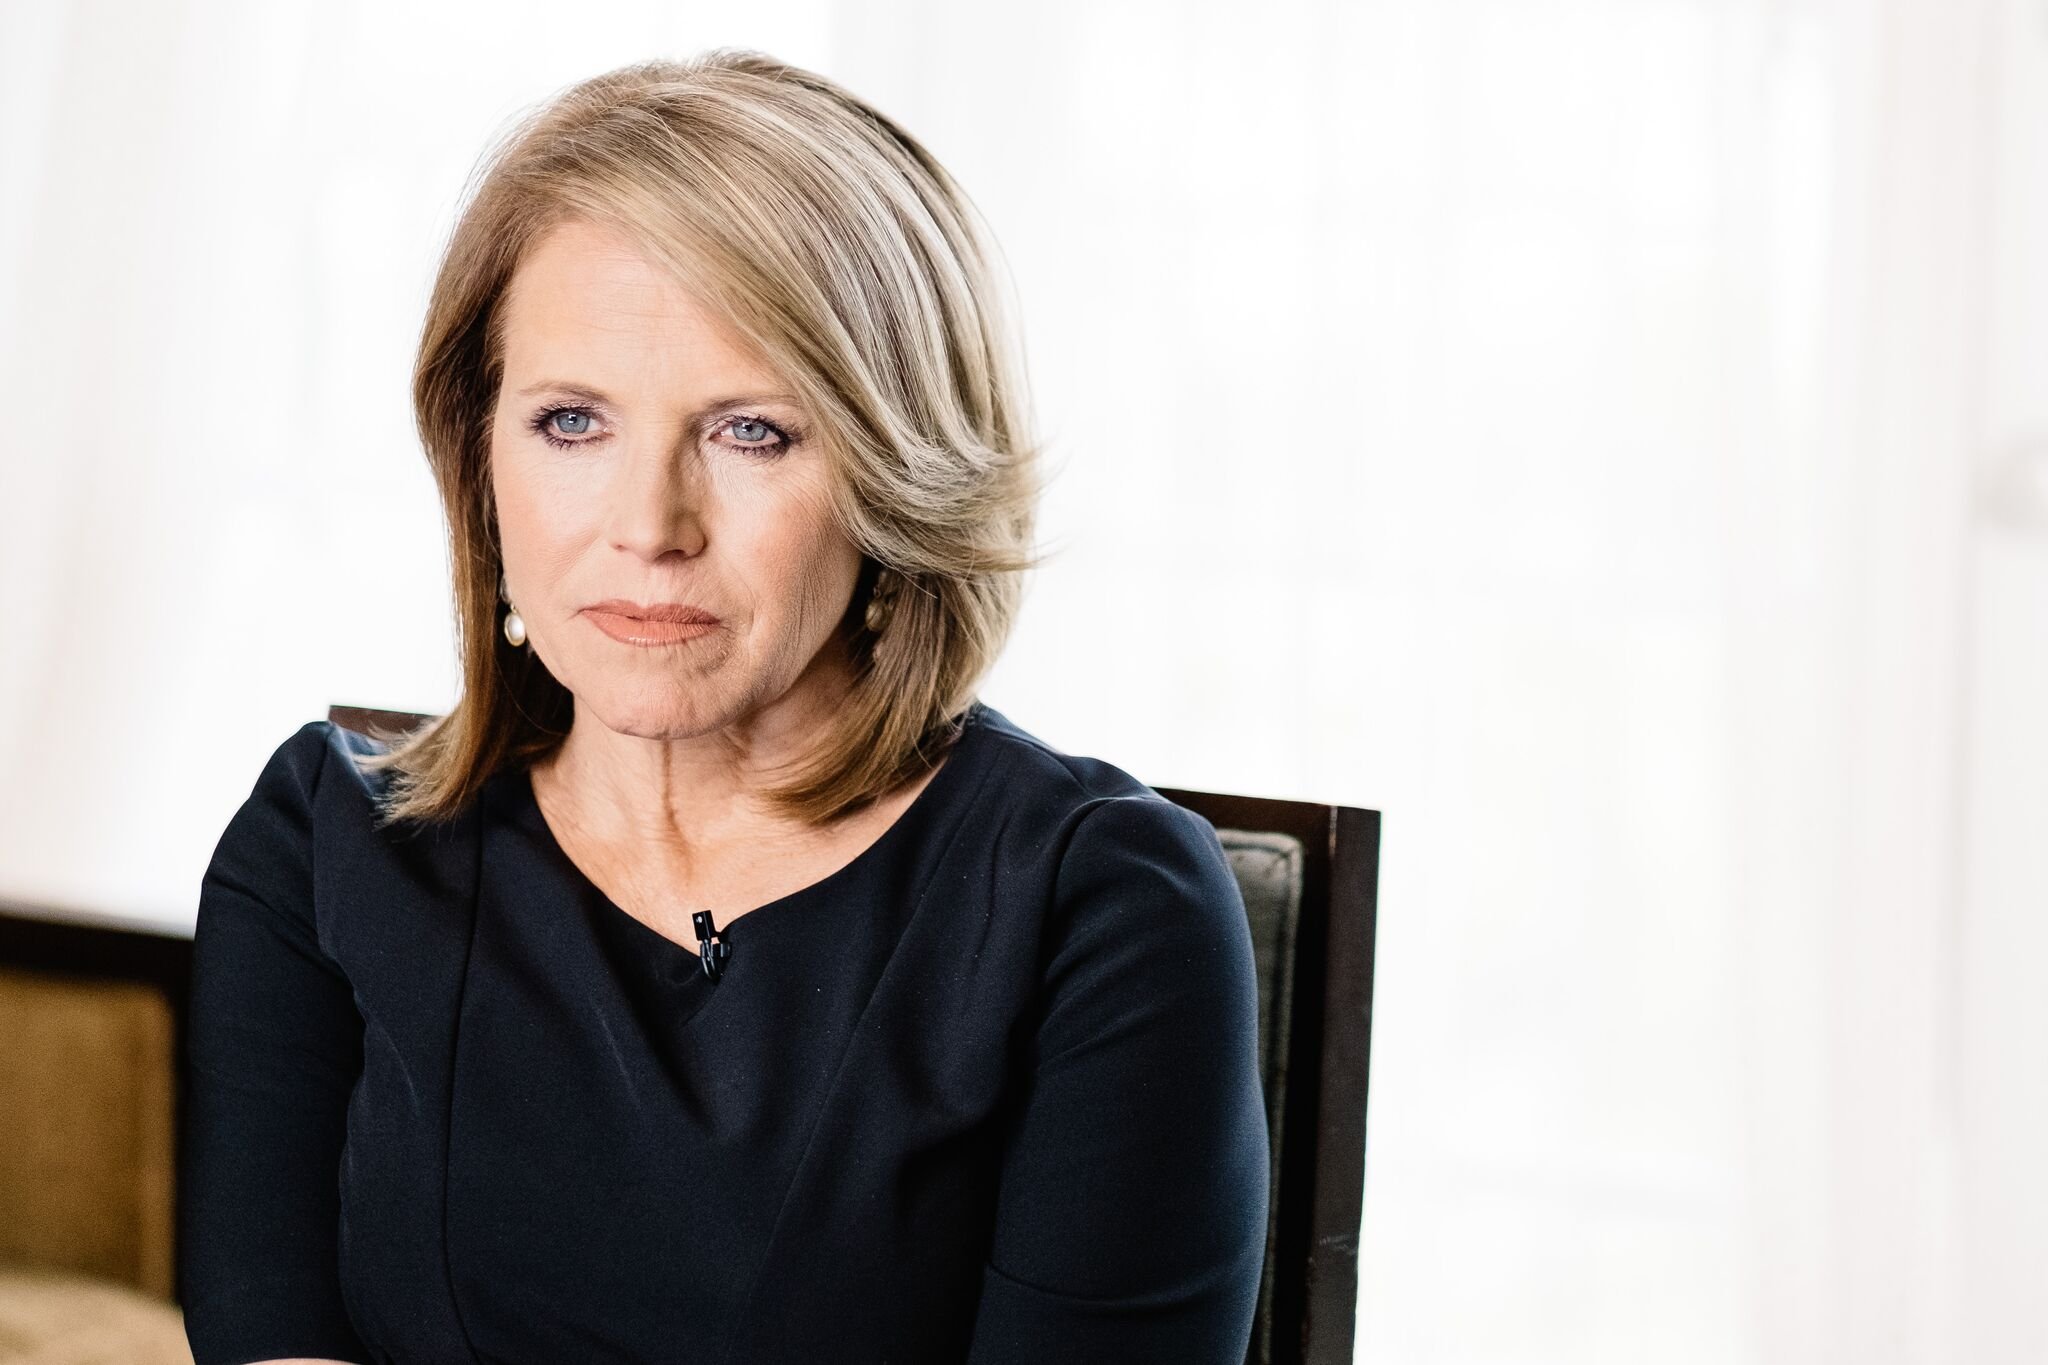 Katie Couric speaks during an interview promoting the EPIX Original Documentary "Under The Gun" | Getty Images 